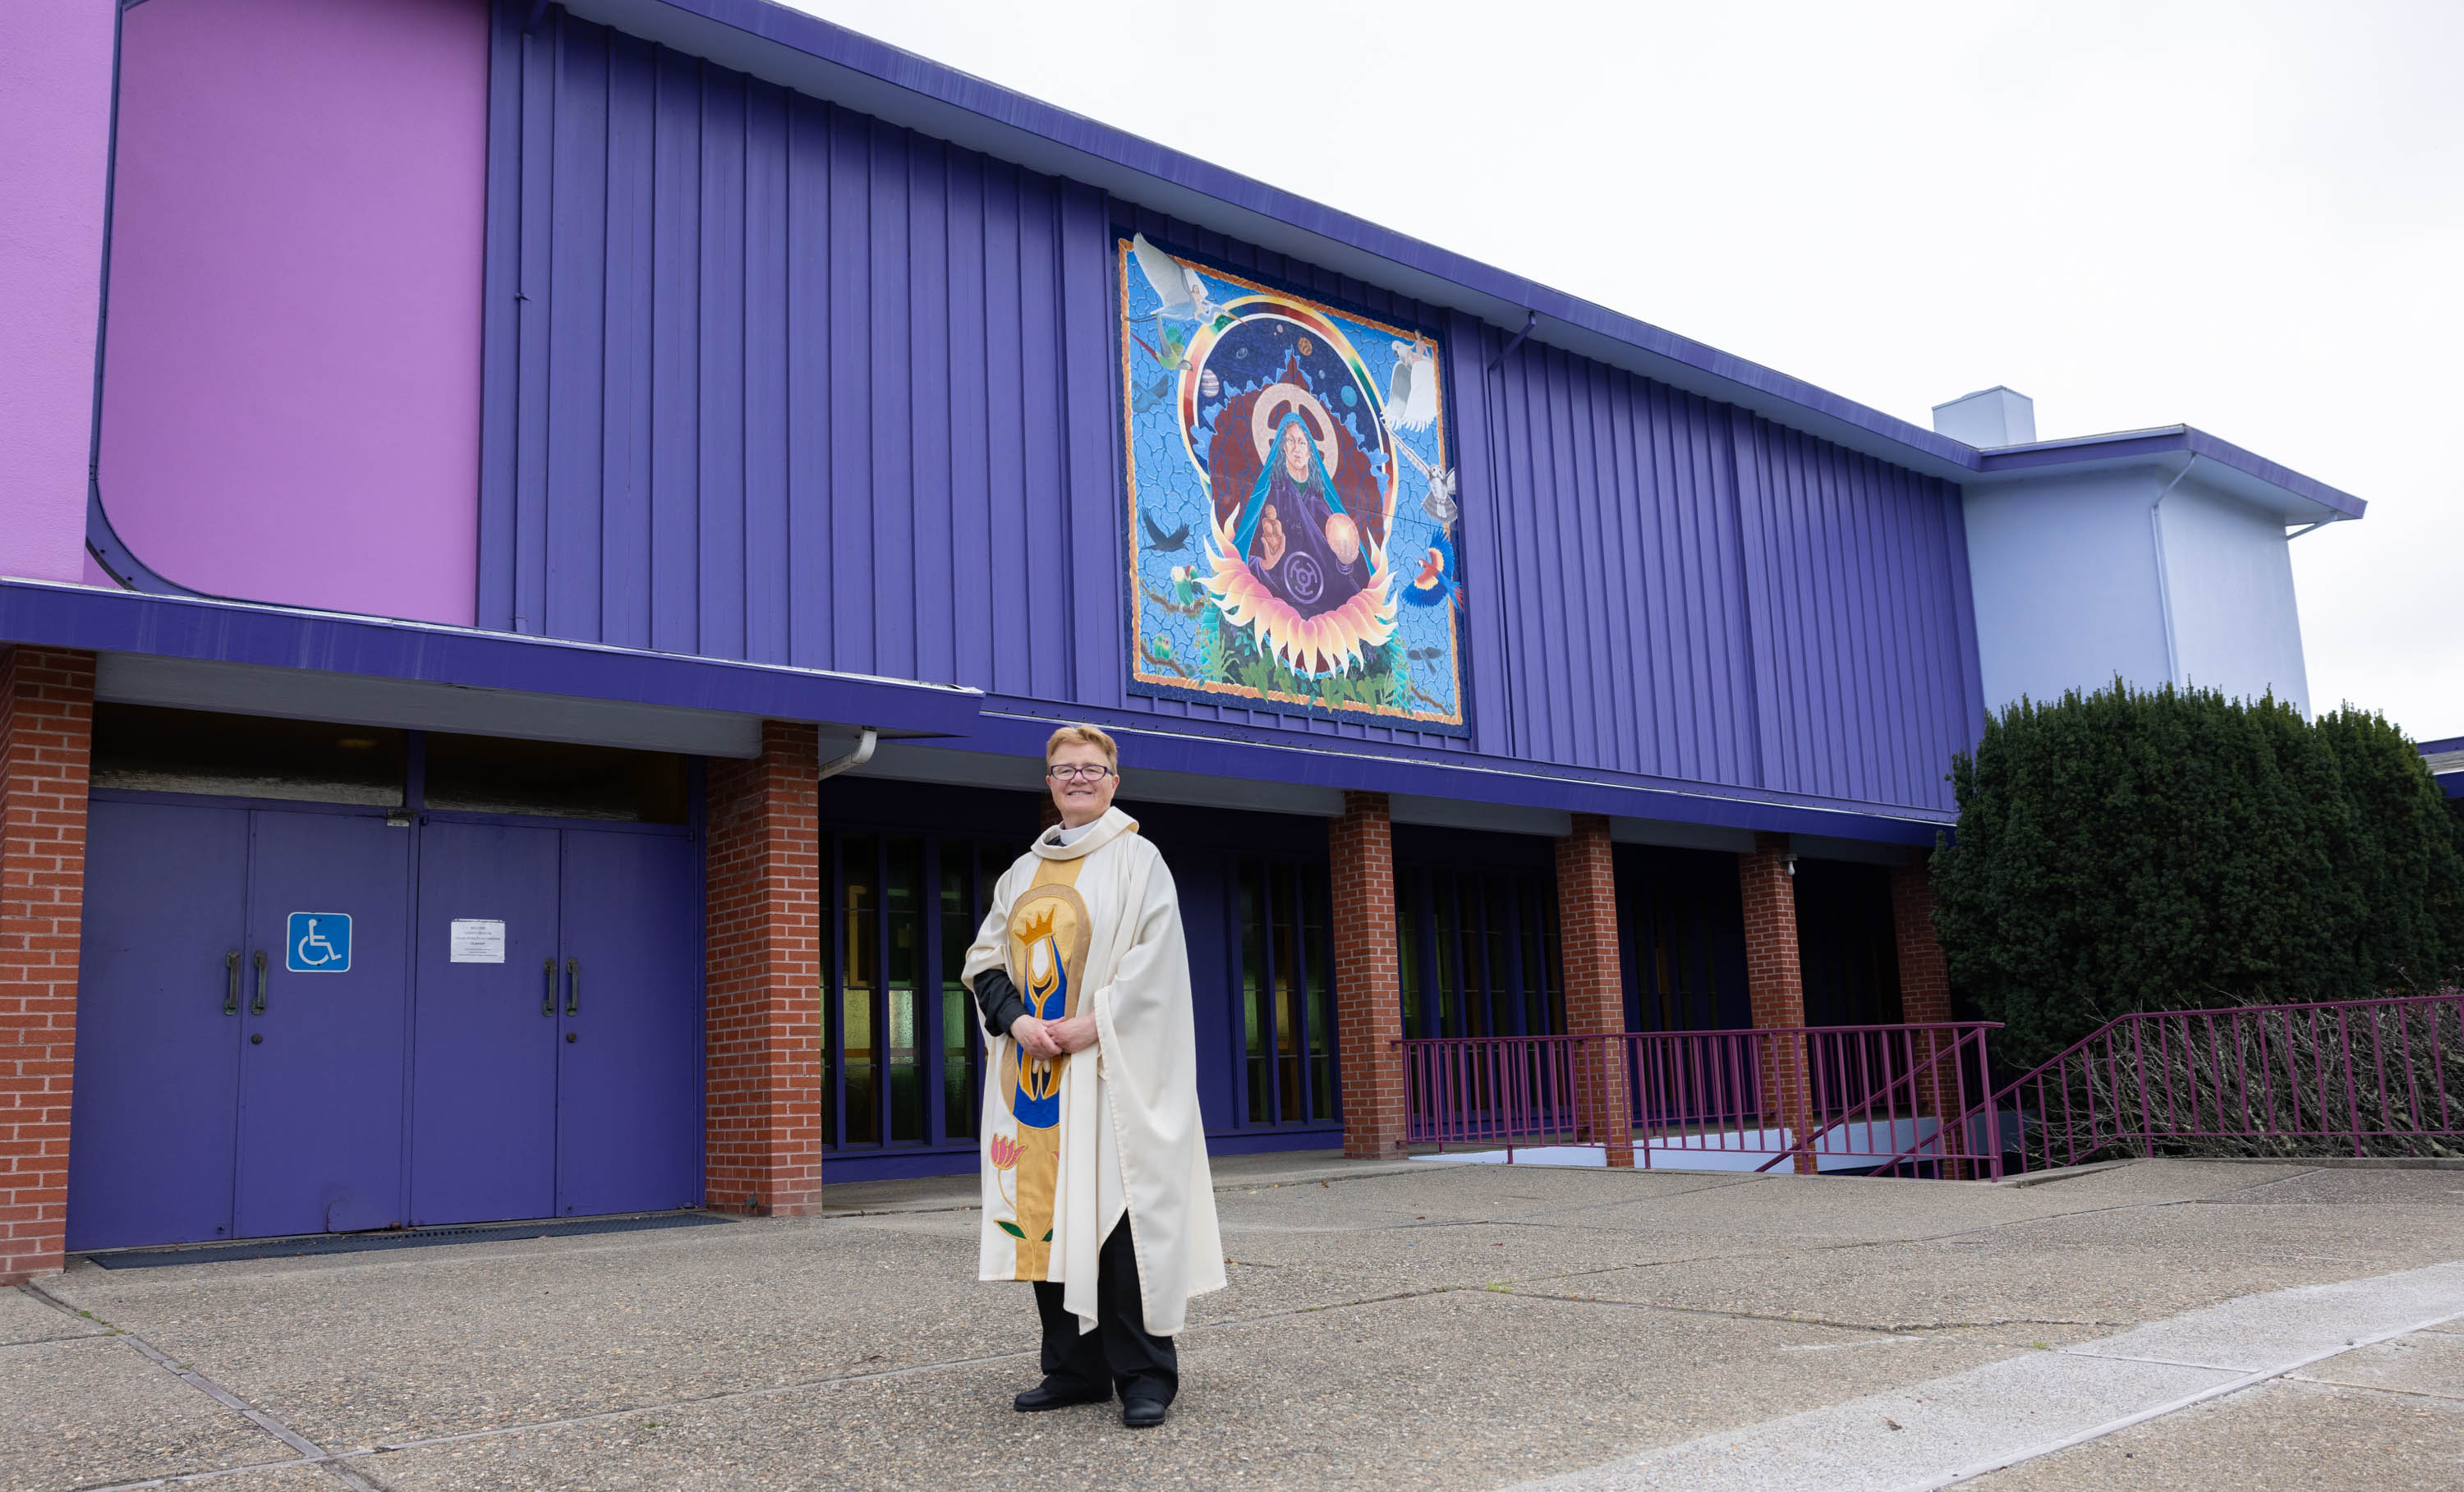 A pastors stands in front of the exteririor of a large purple church